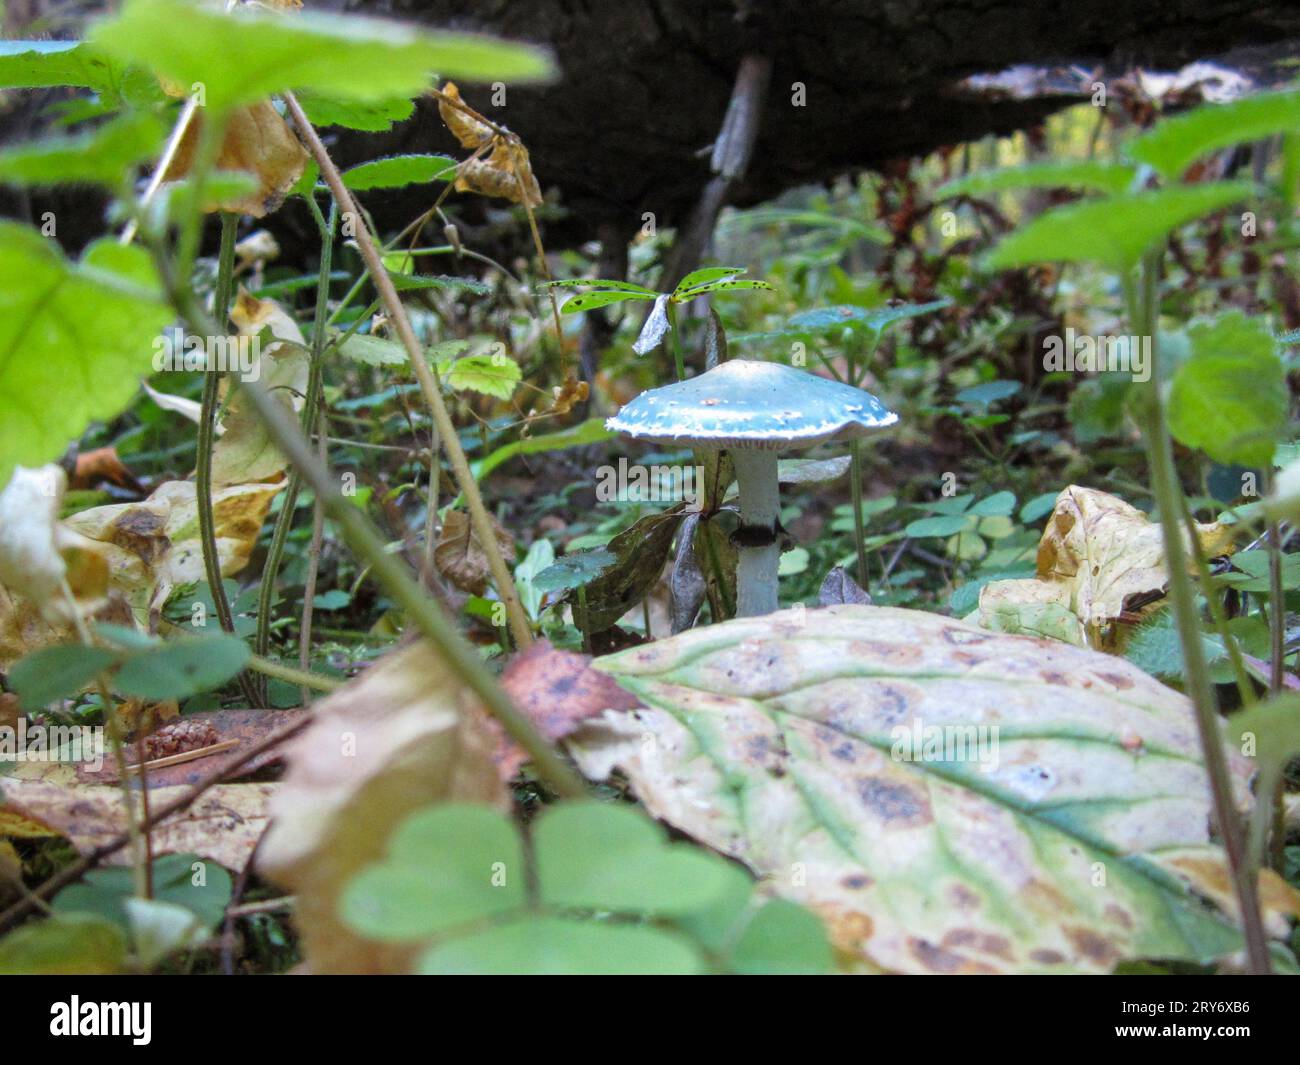 Stropharia blue-green lat. Stropharia aeruginosa is a mushroom of the Strophariaceae family. A rare mushroom, not eaten, causes hallucinations. Enviro Stock Photo